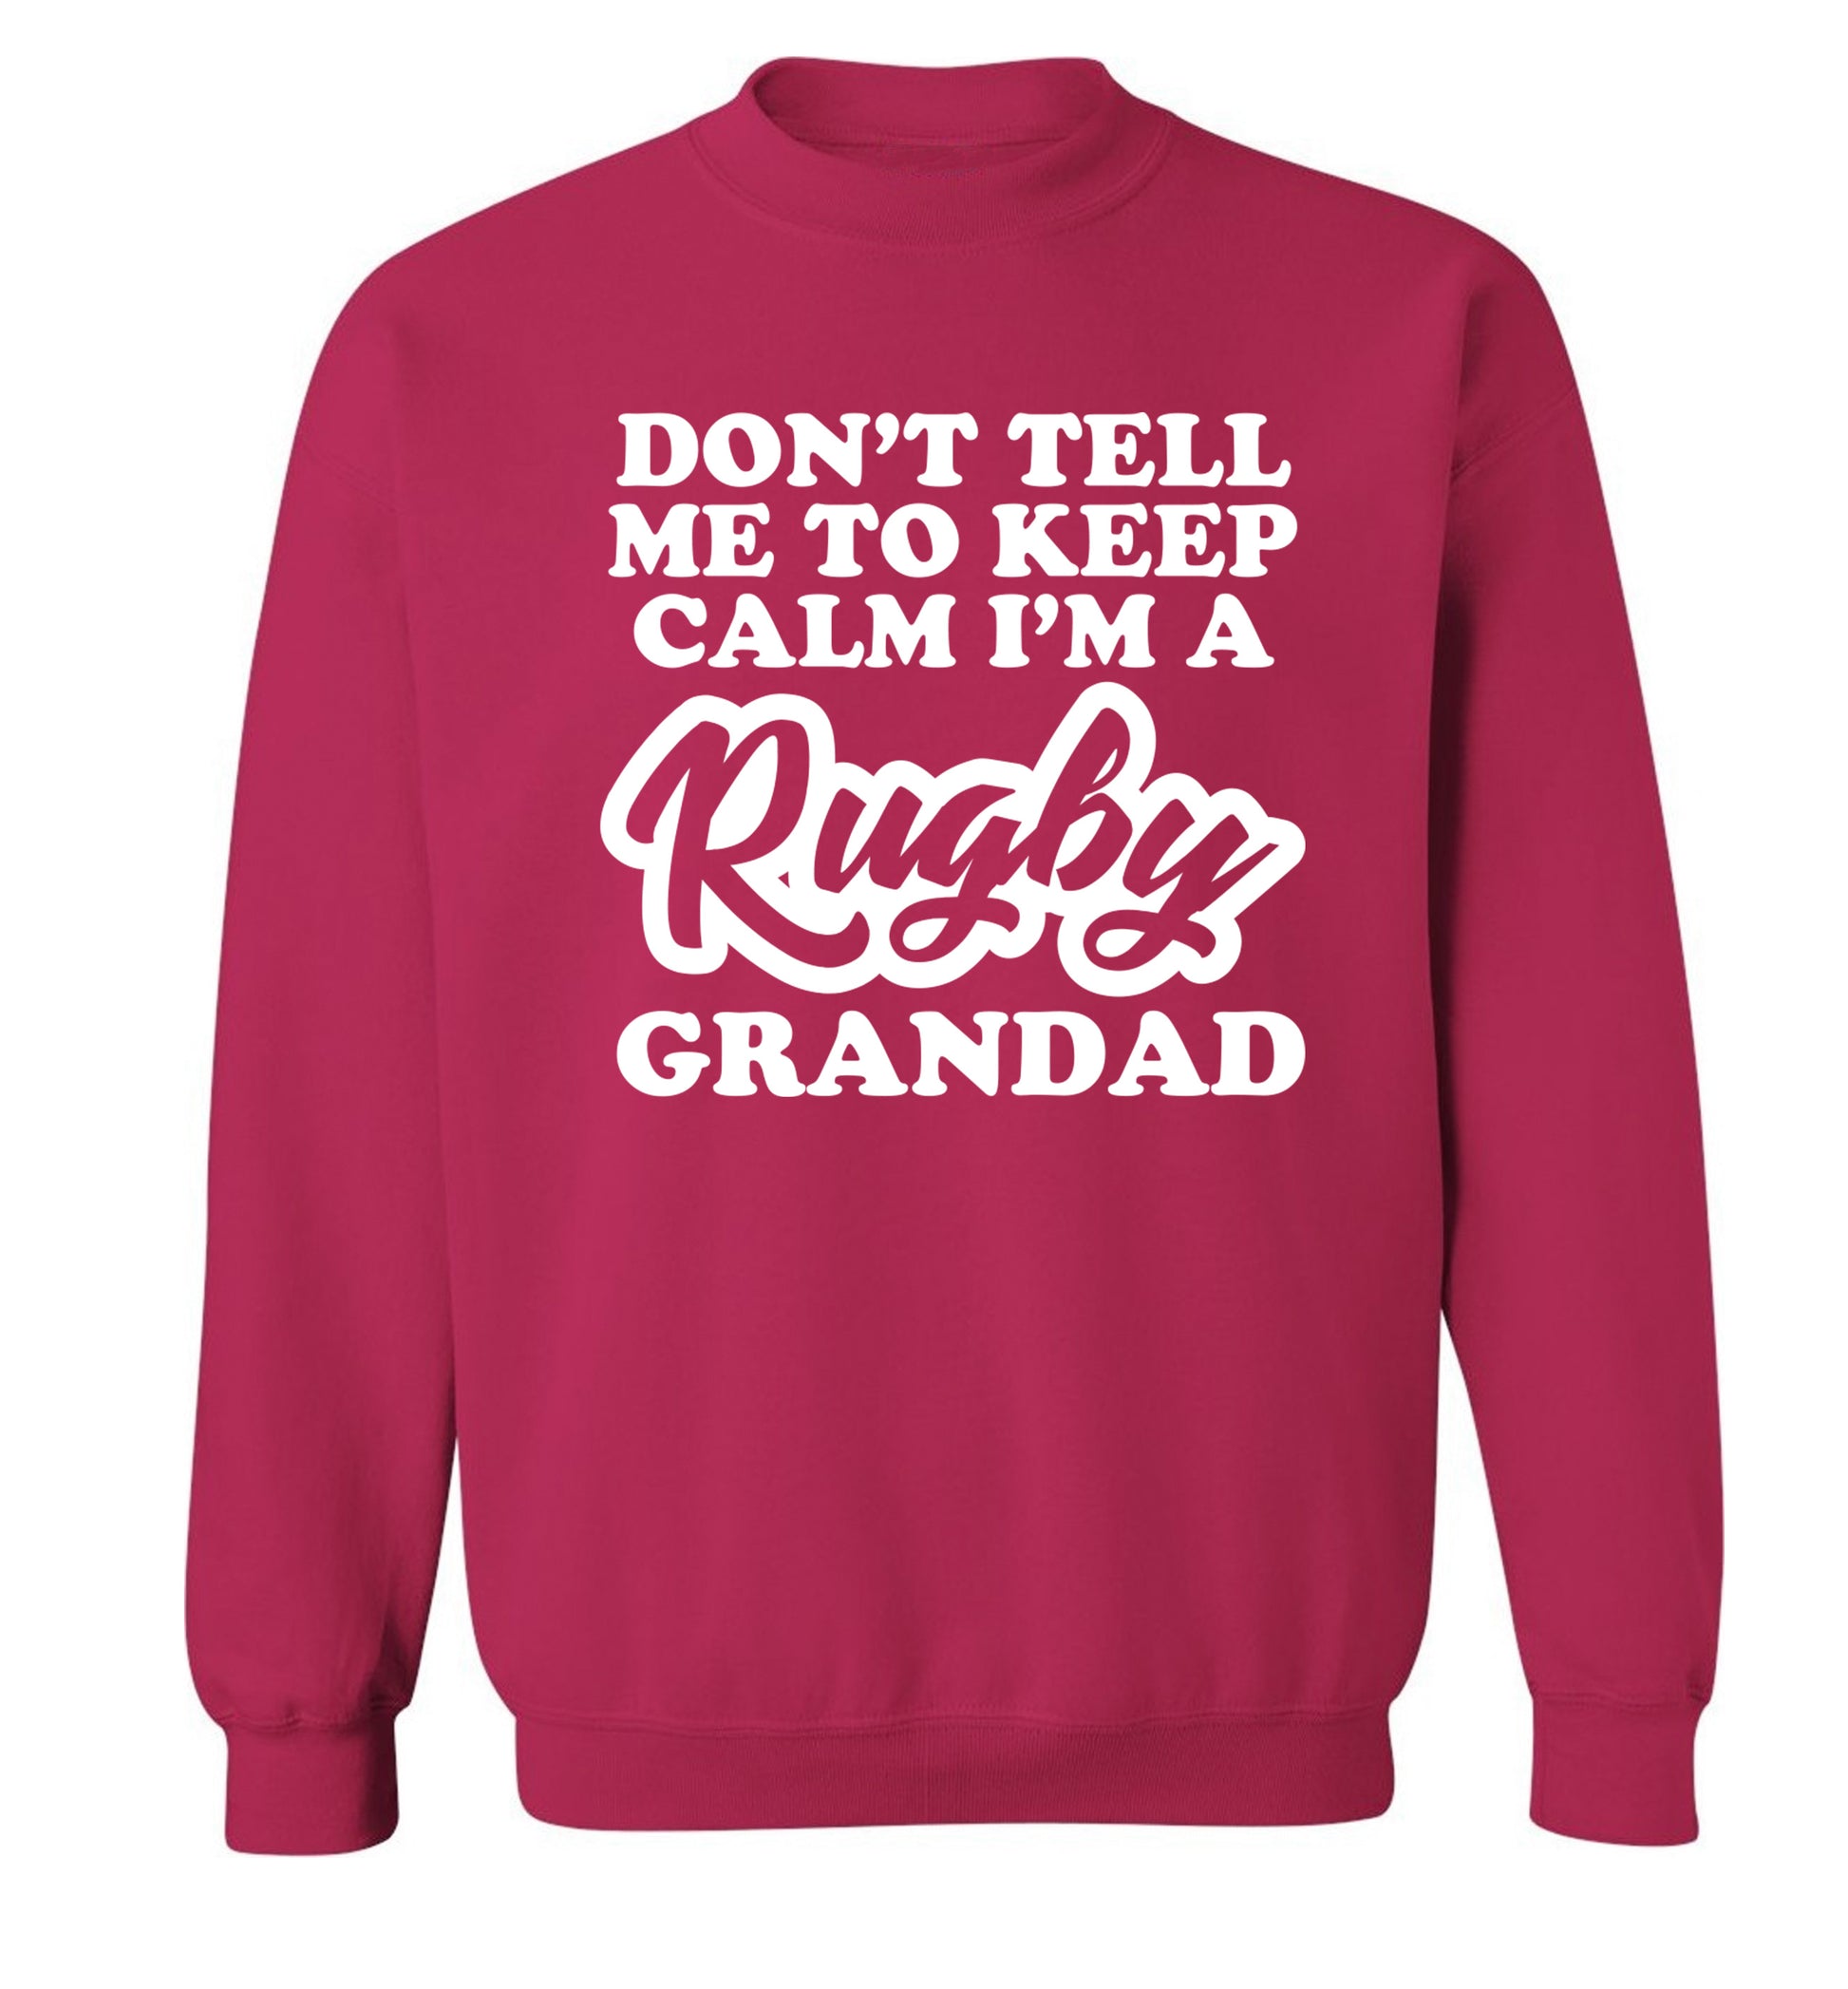 Don't tell me to keep calm I'm a rugby dad Adult's unisex pink Sweater 2XL